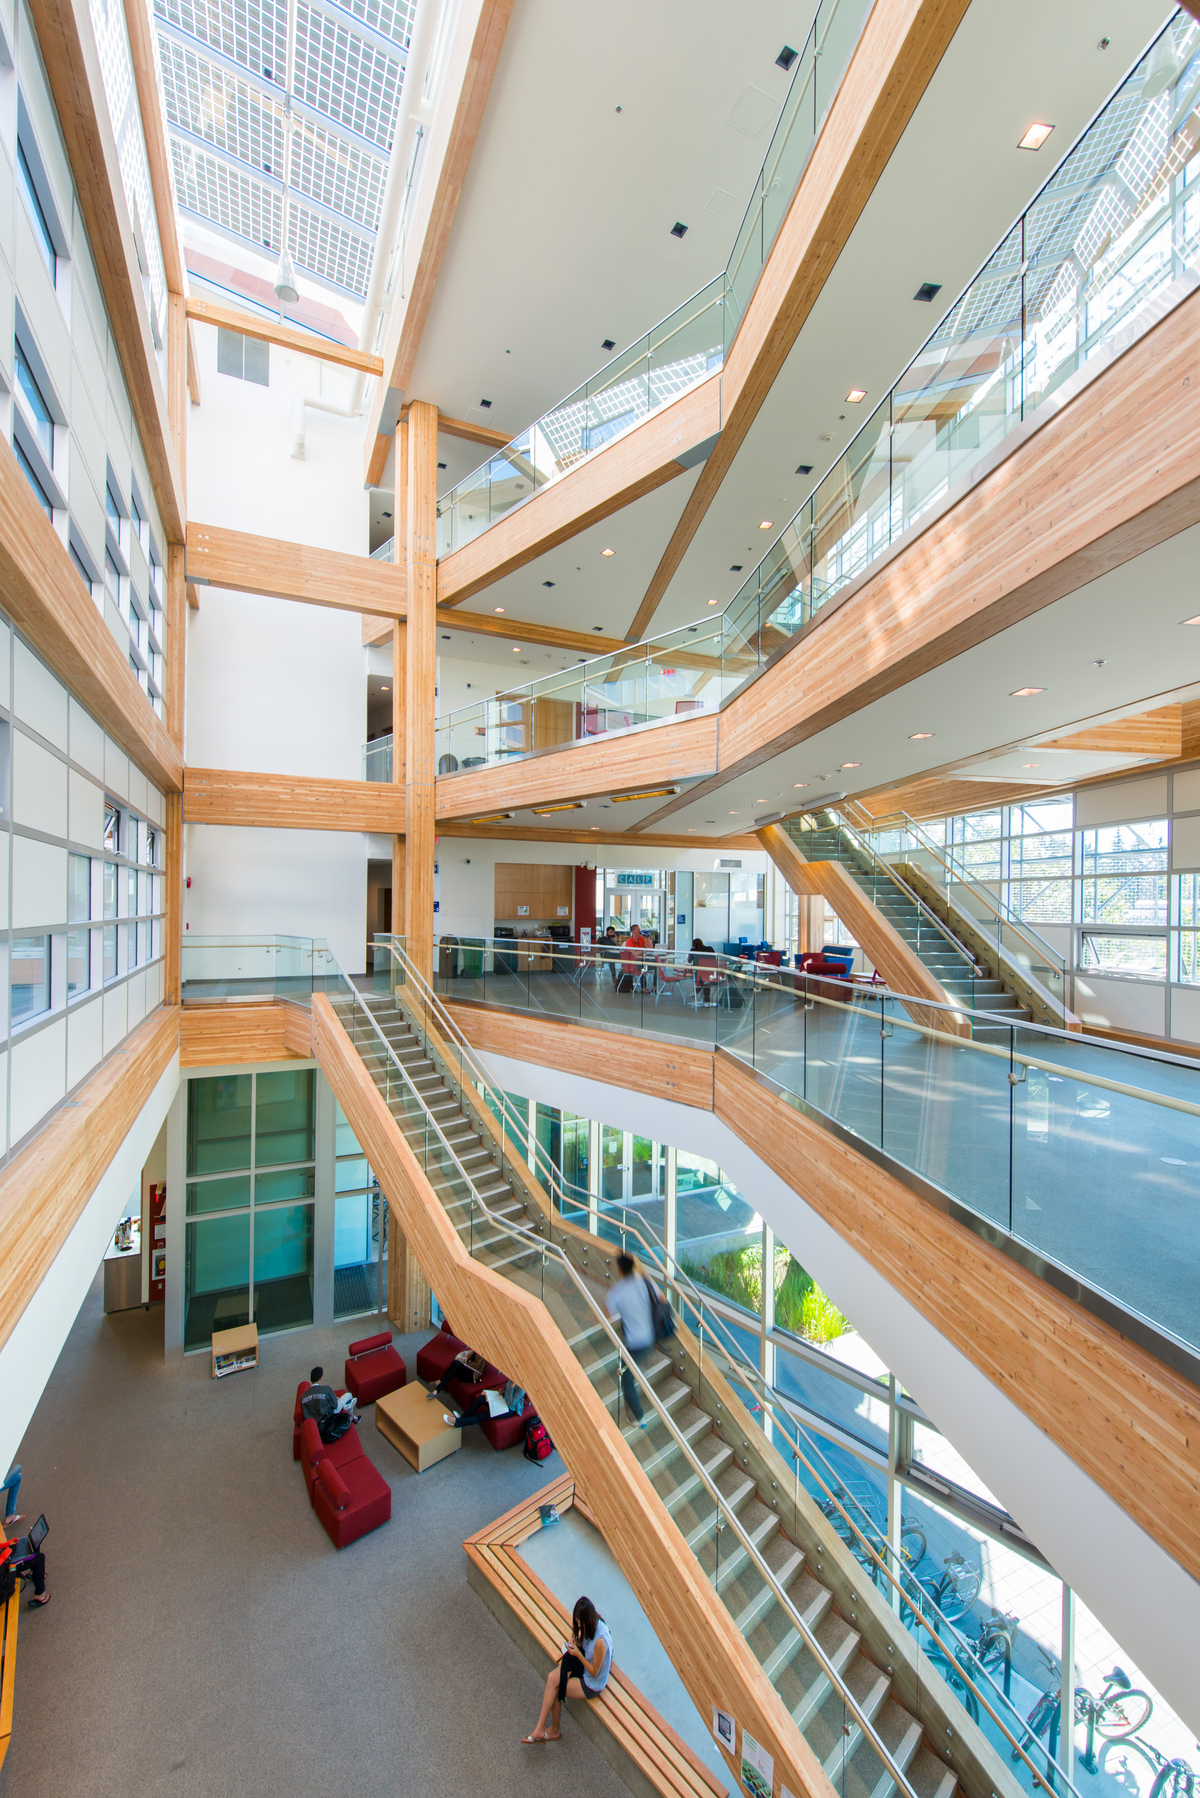 Interior vibrant daytime image of UBC Centre for Interactive Research on Sustainability (CIRS) glass fronted main atrium, showing multi storey stairs, balconies, and columns, all using Glue-laminated timber (Glulam) structural members